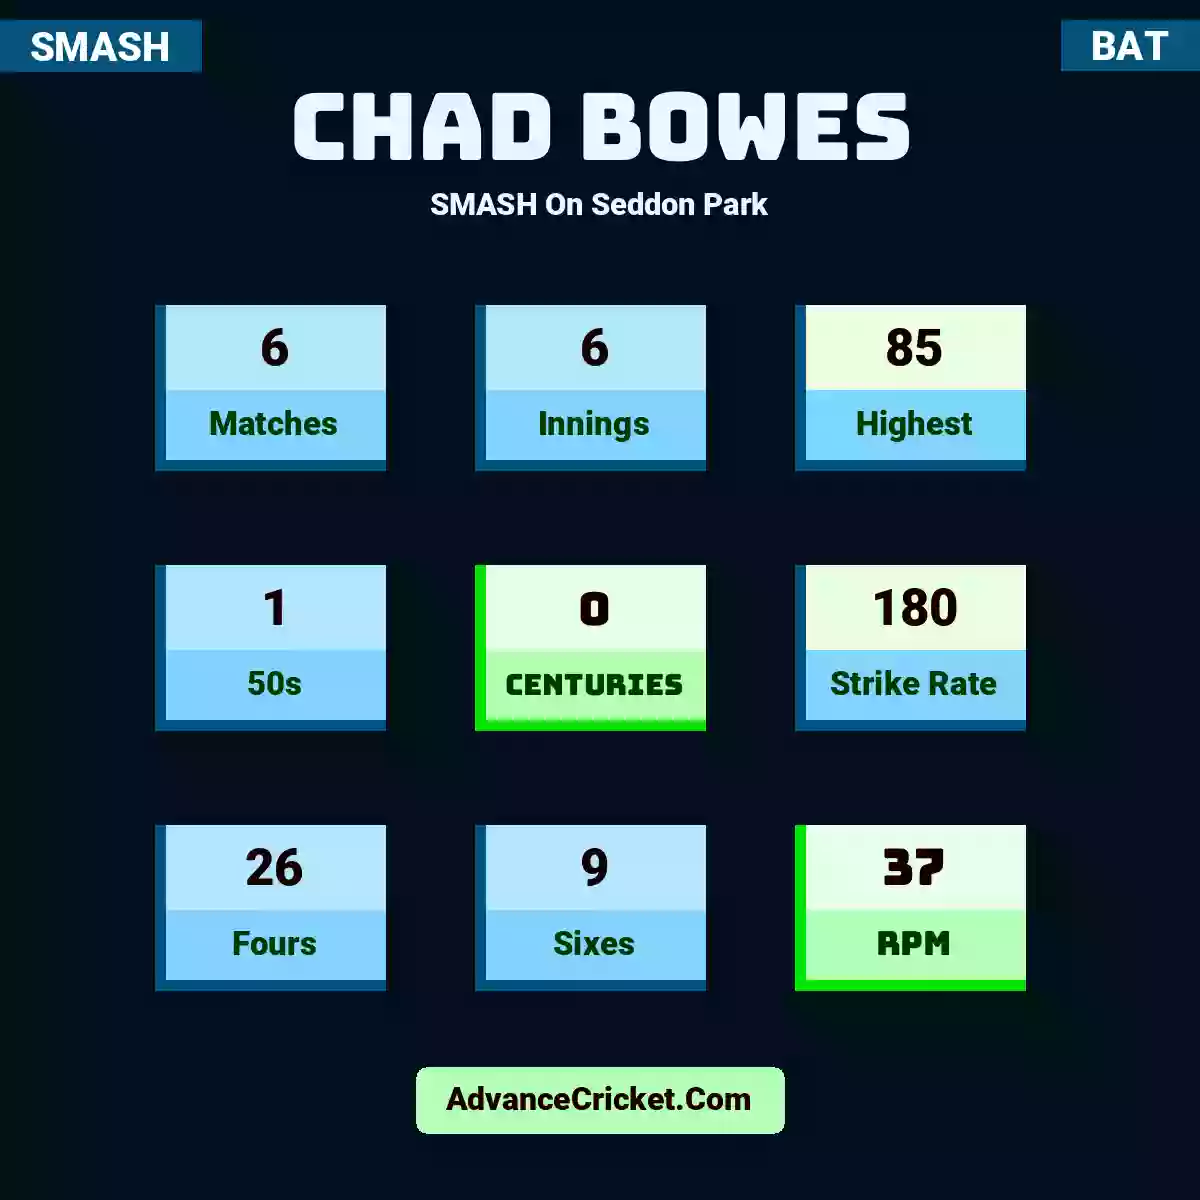 Chad Bowes SMASH  On Seddon Park, Chad Bowes played 6 matches, scored 85 runs as highest, 1 half-centuries, and 0 centuries, with a strike rate of 180. C.Bowes hit 26 fours and 9 sixes, with an RPM of 37.